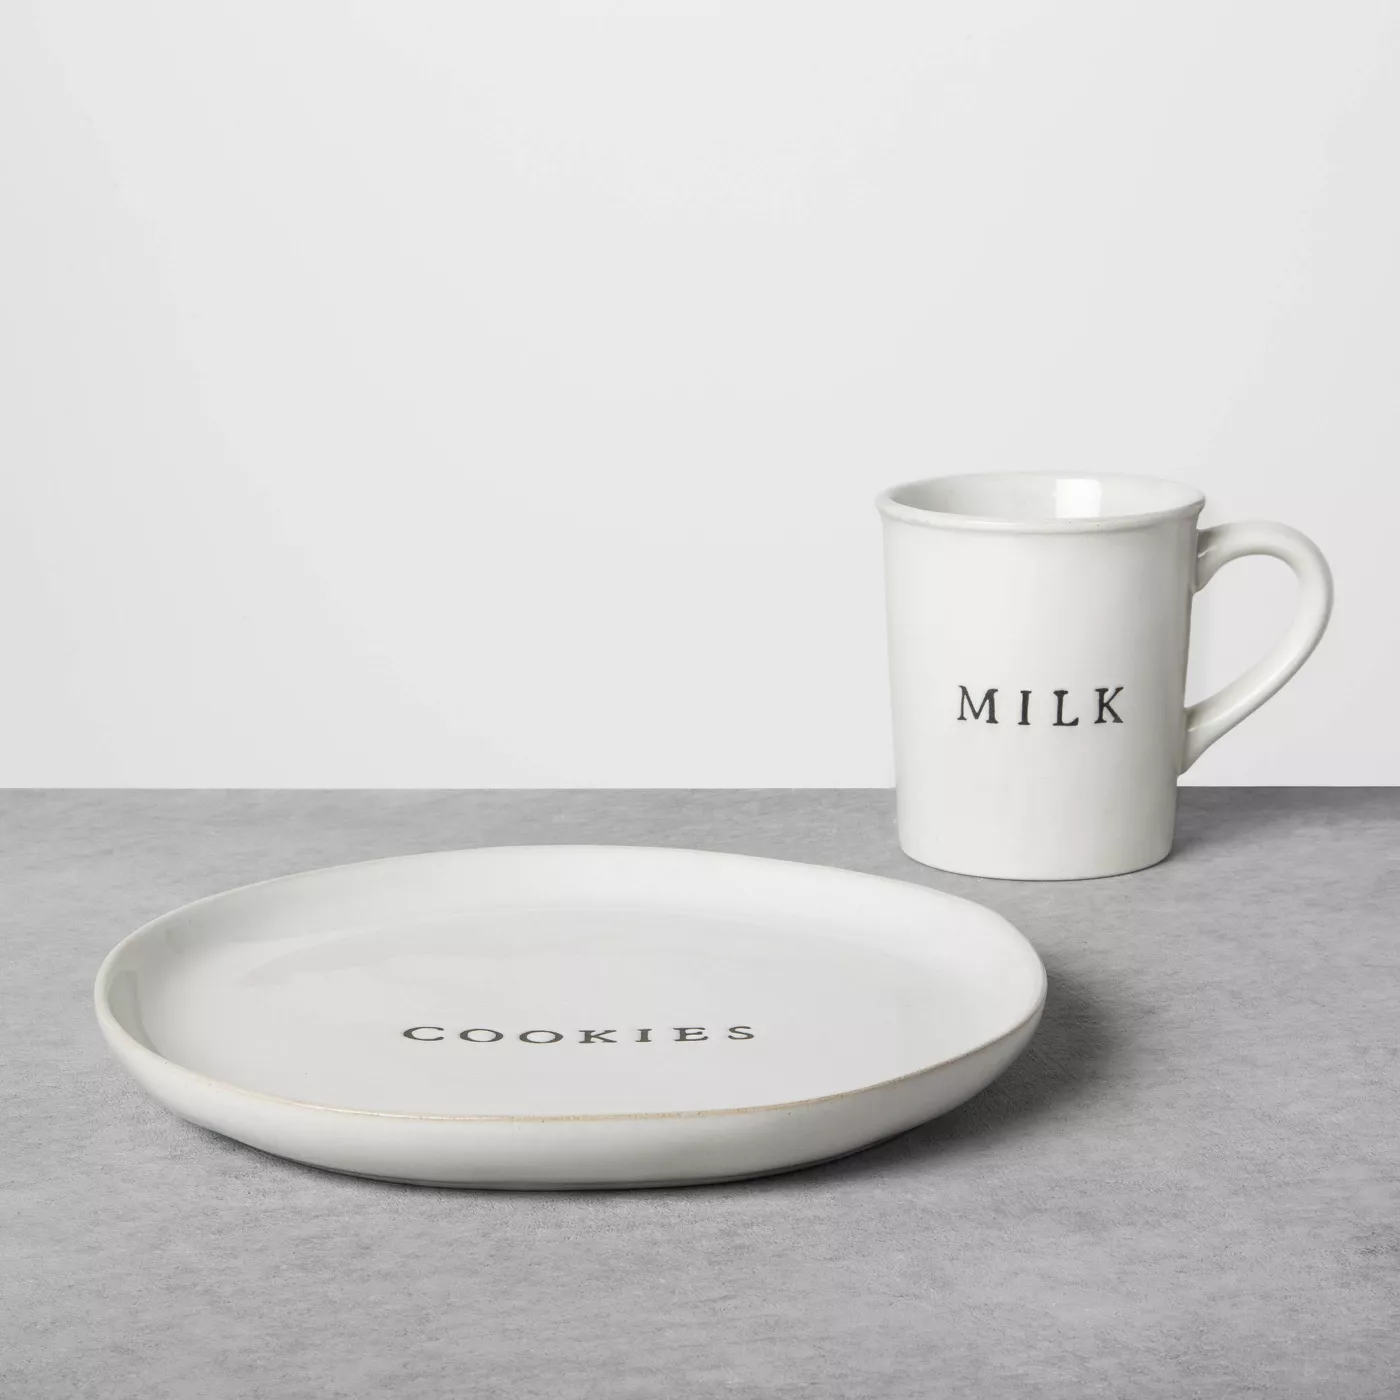 Cookie Plate & Milk Set Sour Cream - Hearth & Hand™ with Magnolia - image 1 of 2